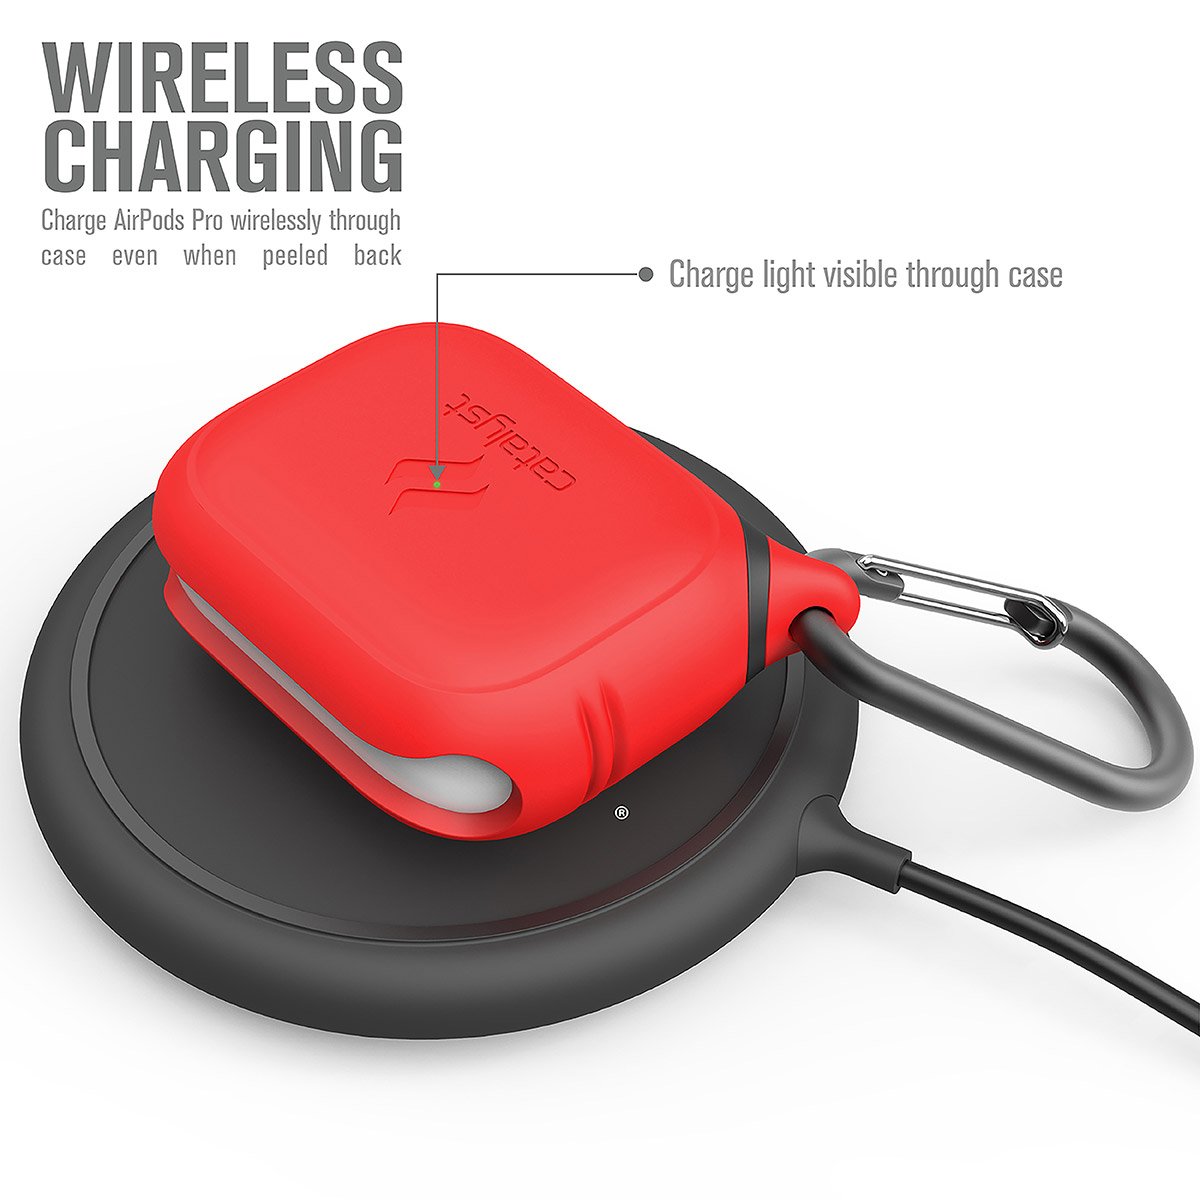 CATAPDPRORED | catalyst airpods pro gen 2 1 waterproof case carabiner flame red on top of a wireless charger text reads wireless charging charge airpods pro wirelessly through case even when peeled back charge light visible through case